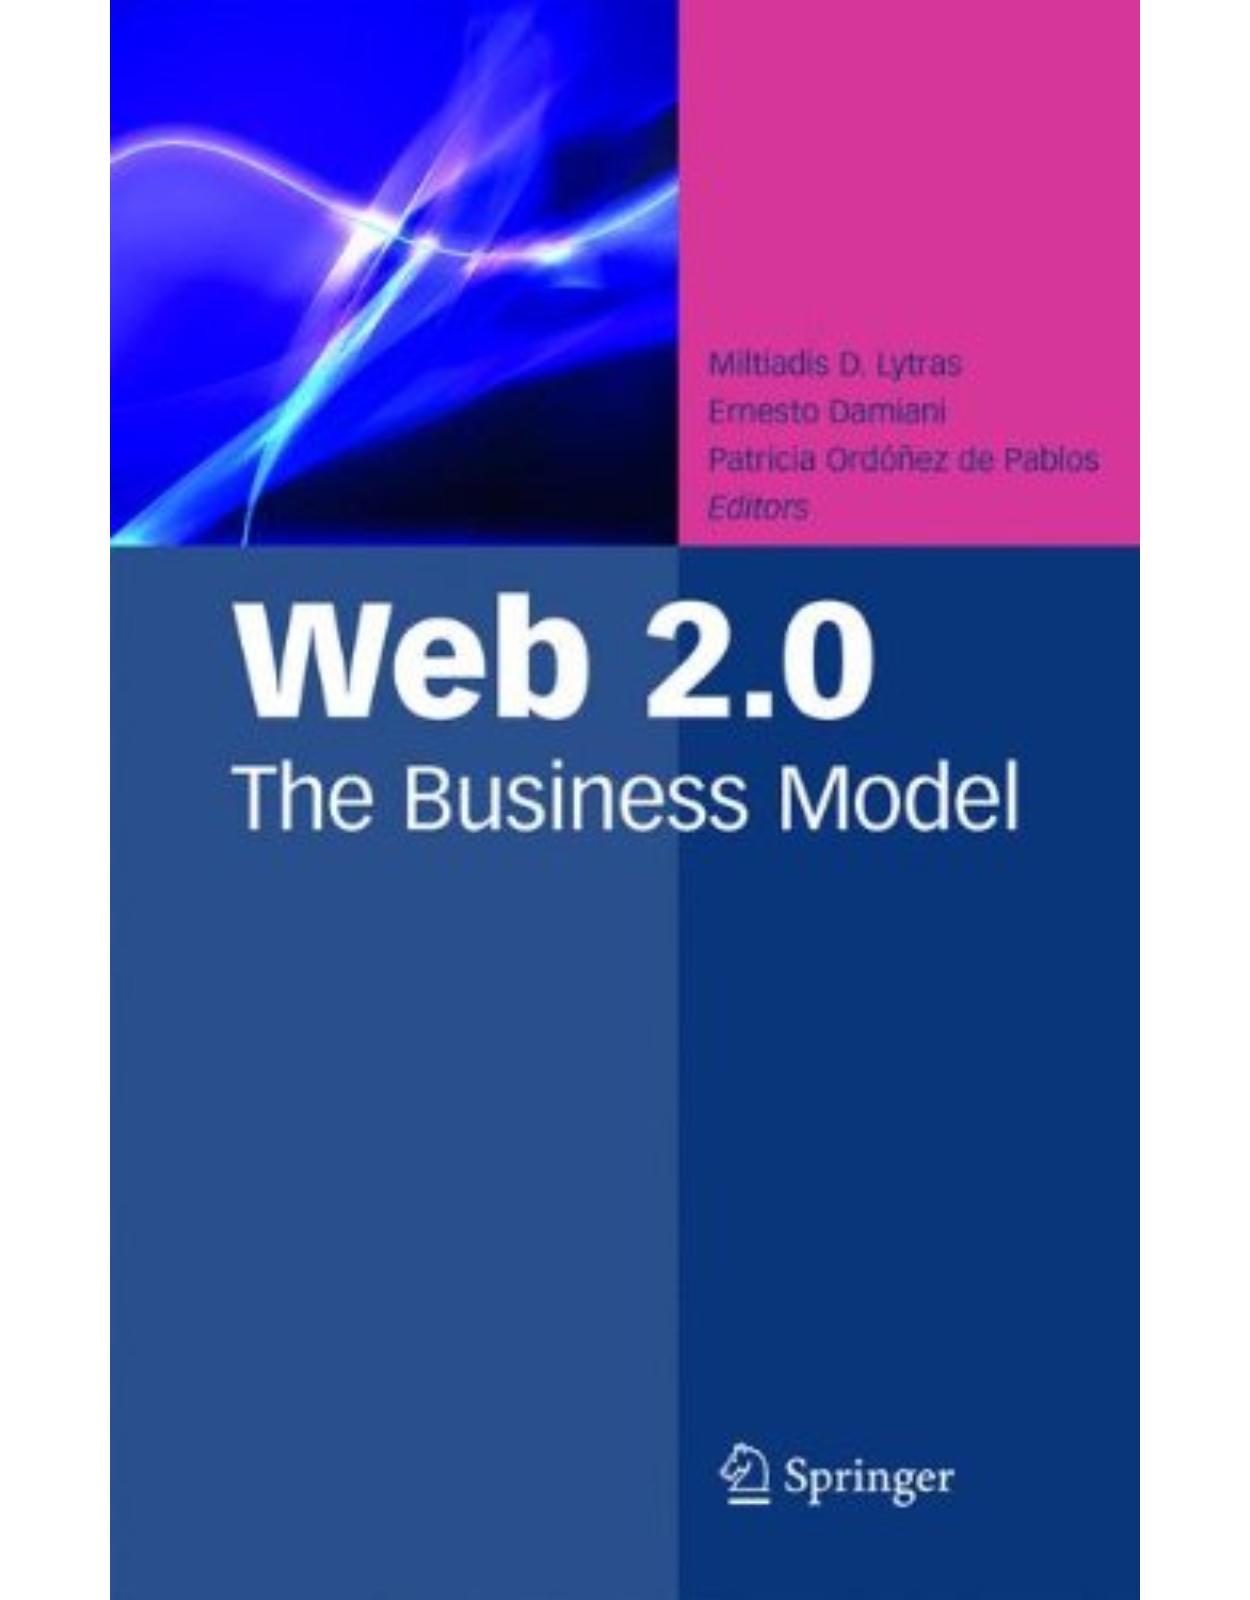 Web 2.0: The Business Model